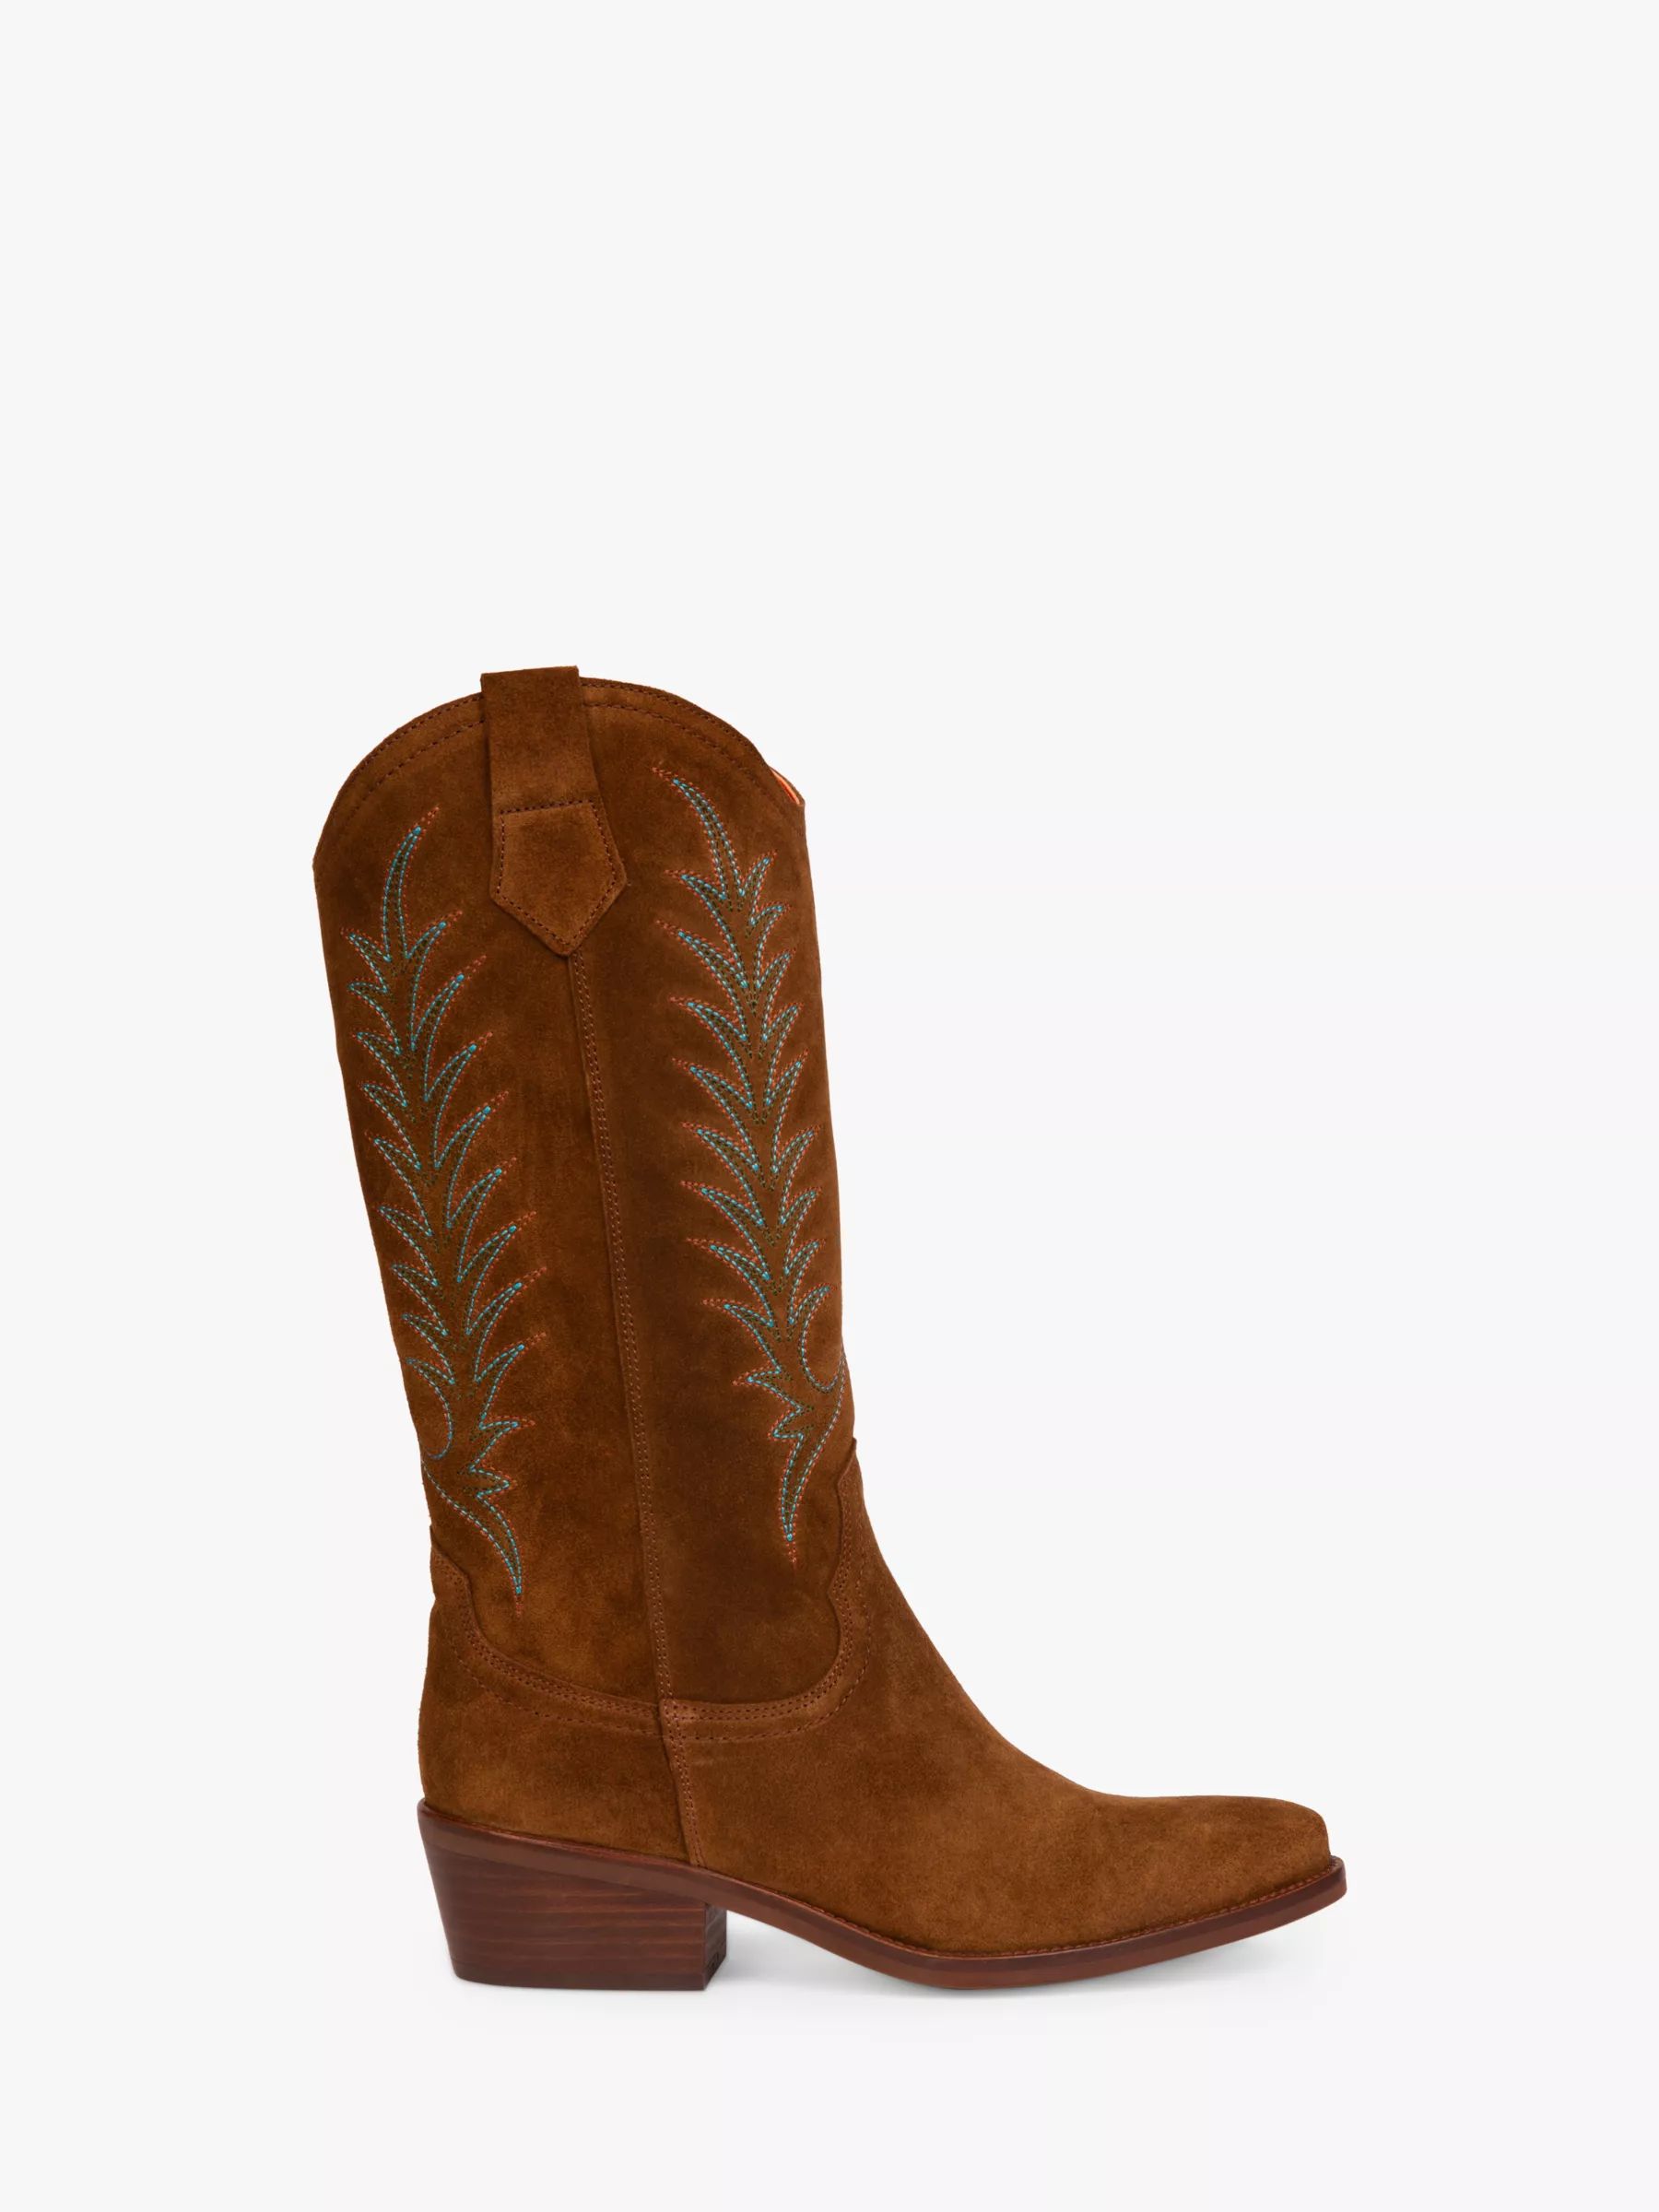 Penelope Chilvers Goldie Embroidered Suede Cowboy Boots, Tan | John Lewis (UK)